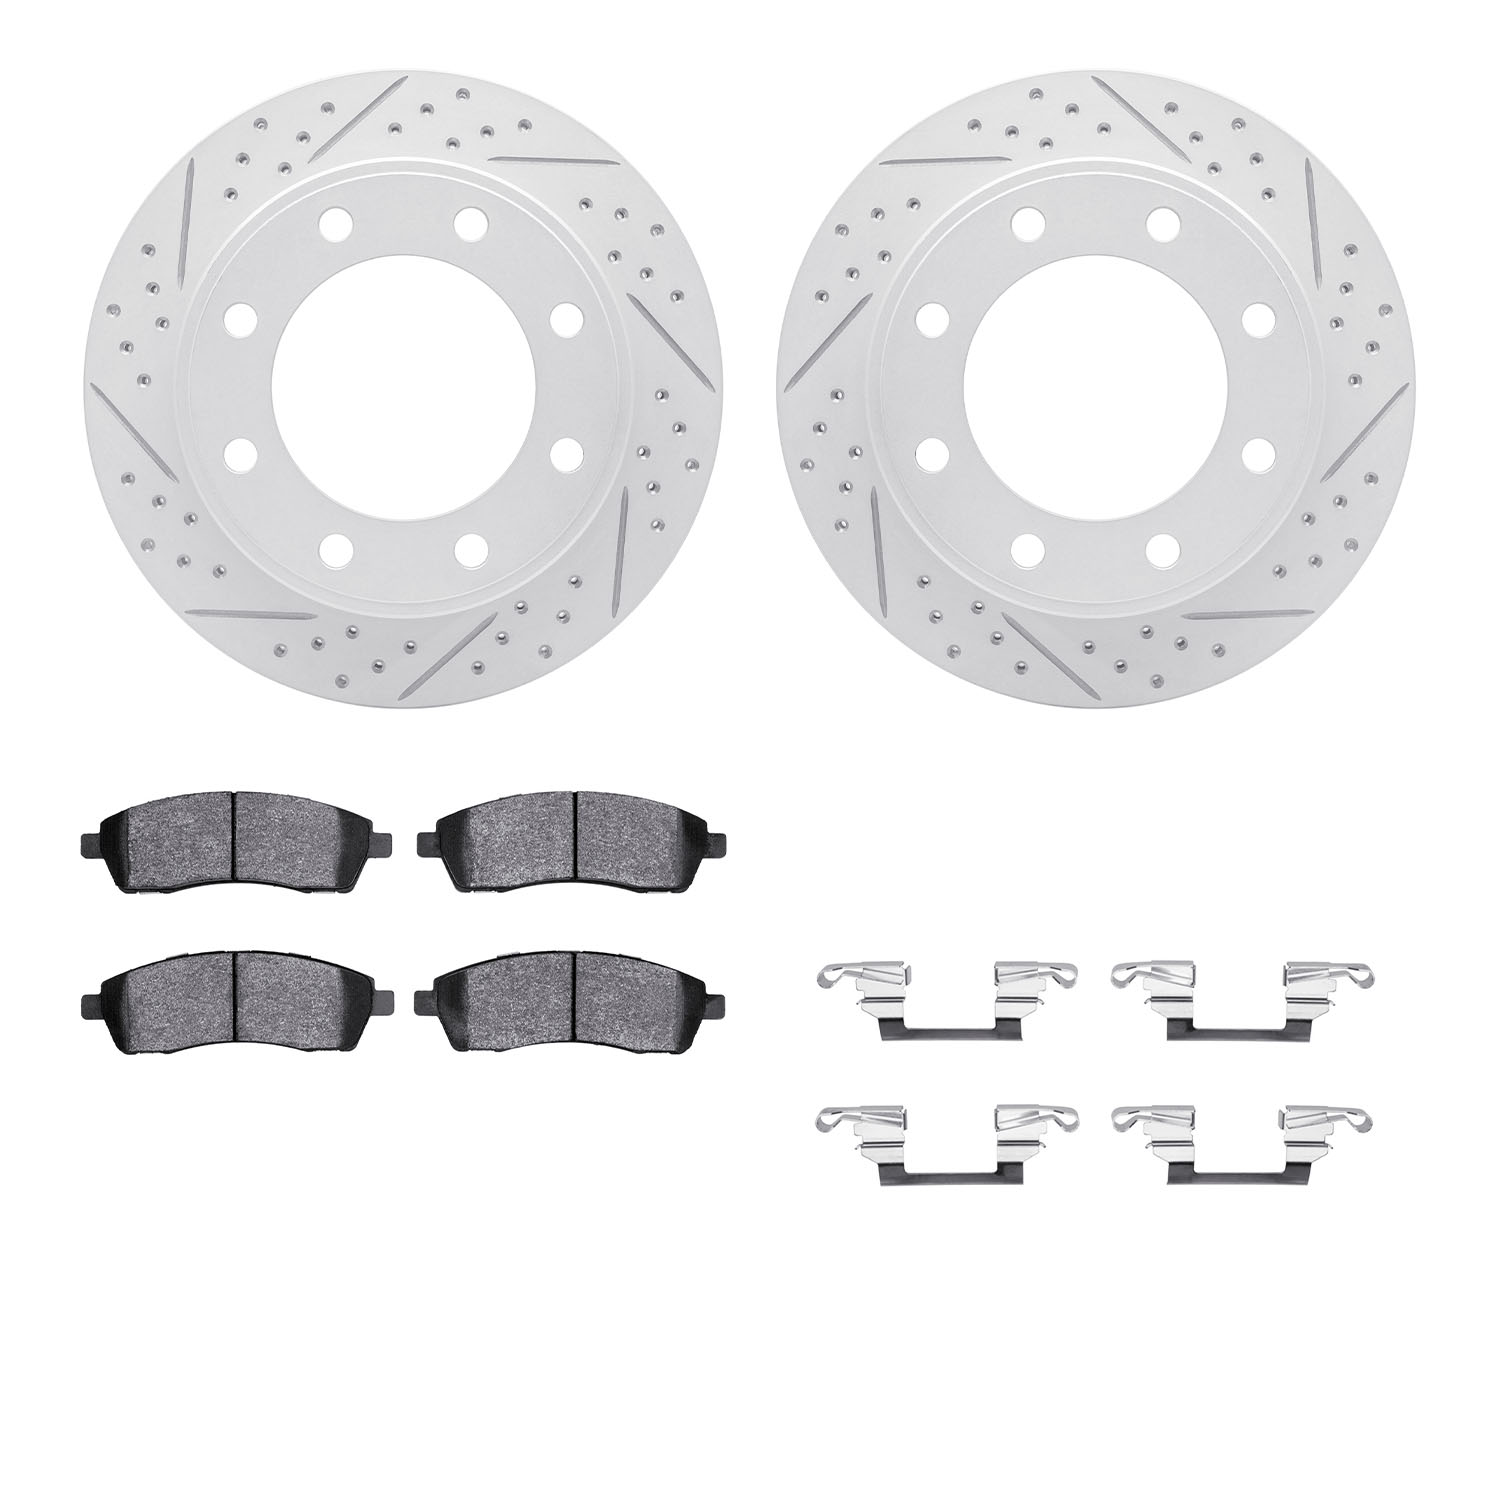 2212-99105 Geoperformance Drilled/Slotted Rotors w/Heavy-Duty Pads Kit & Hardware, 1999-2005 Ford/Lincoln/Mercury/Mazda, Positio